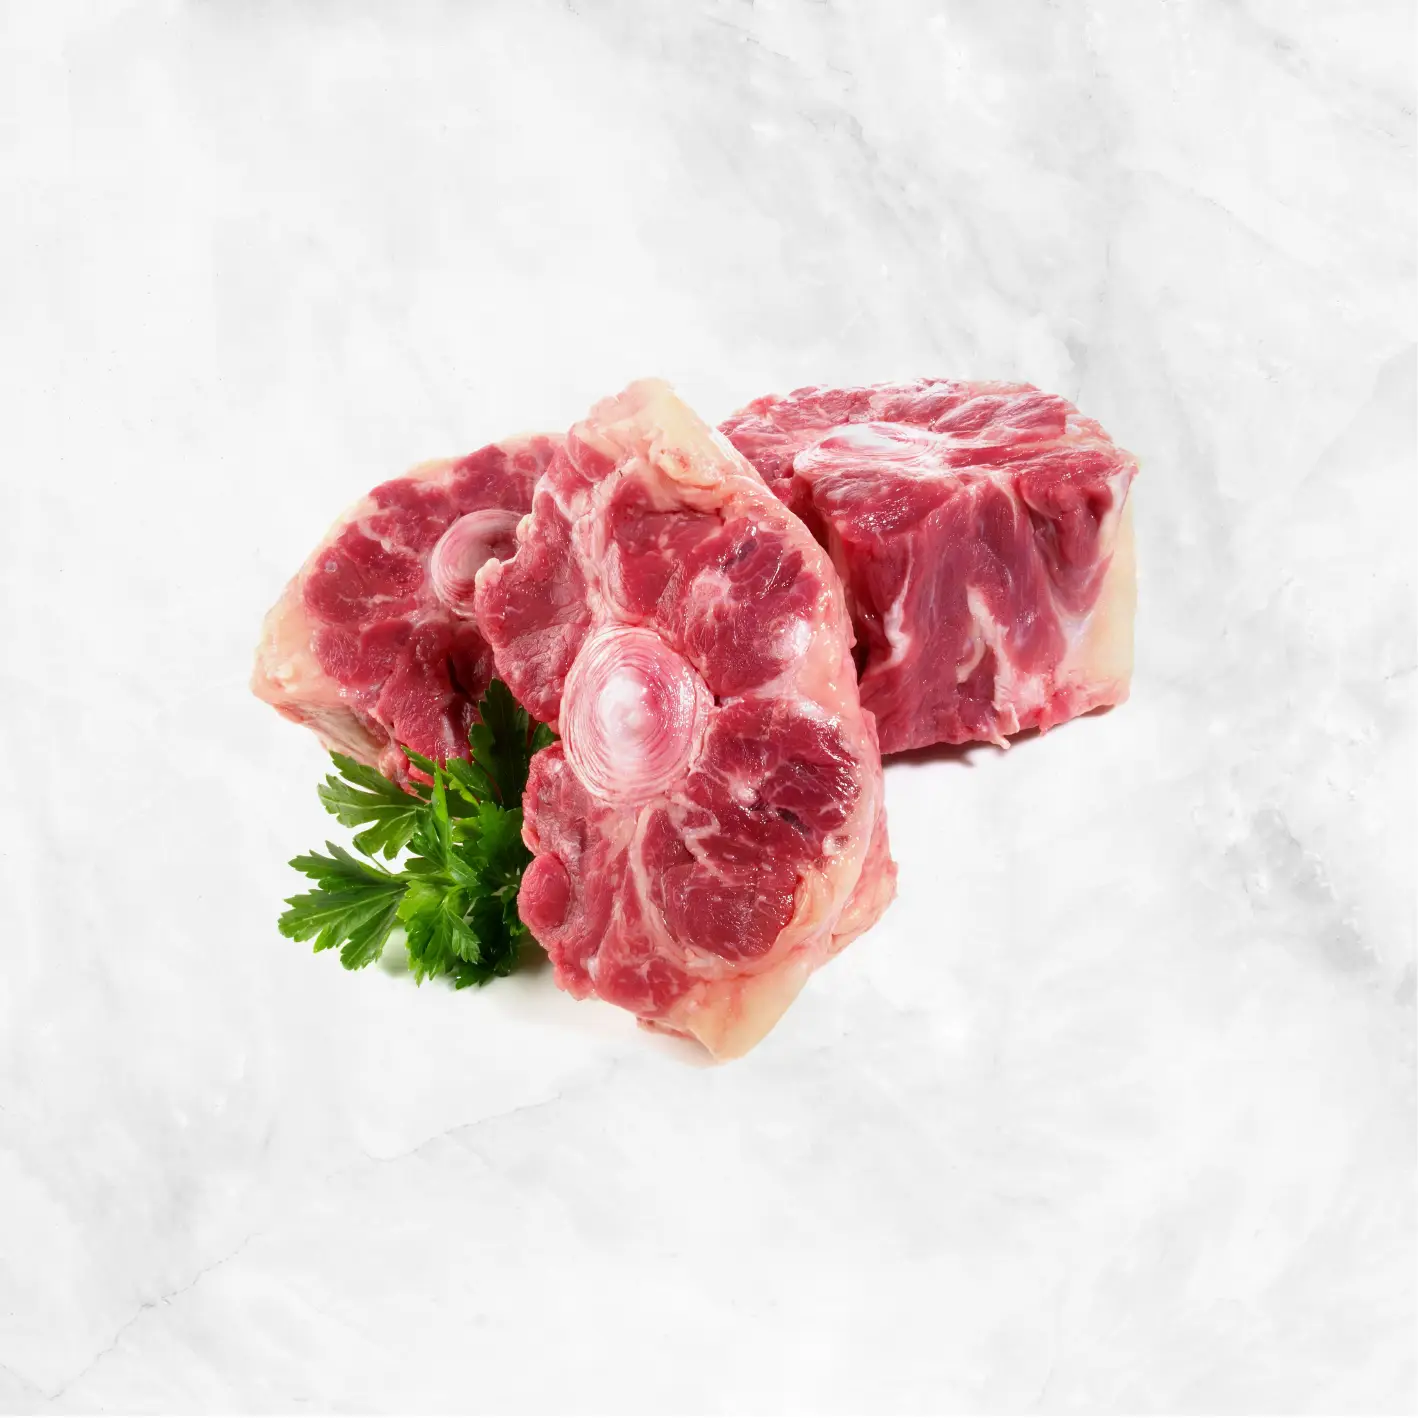 Grass-Fed Beef Oxtail Delivery